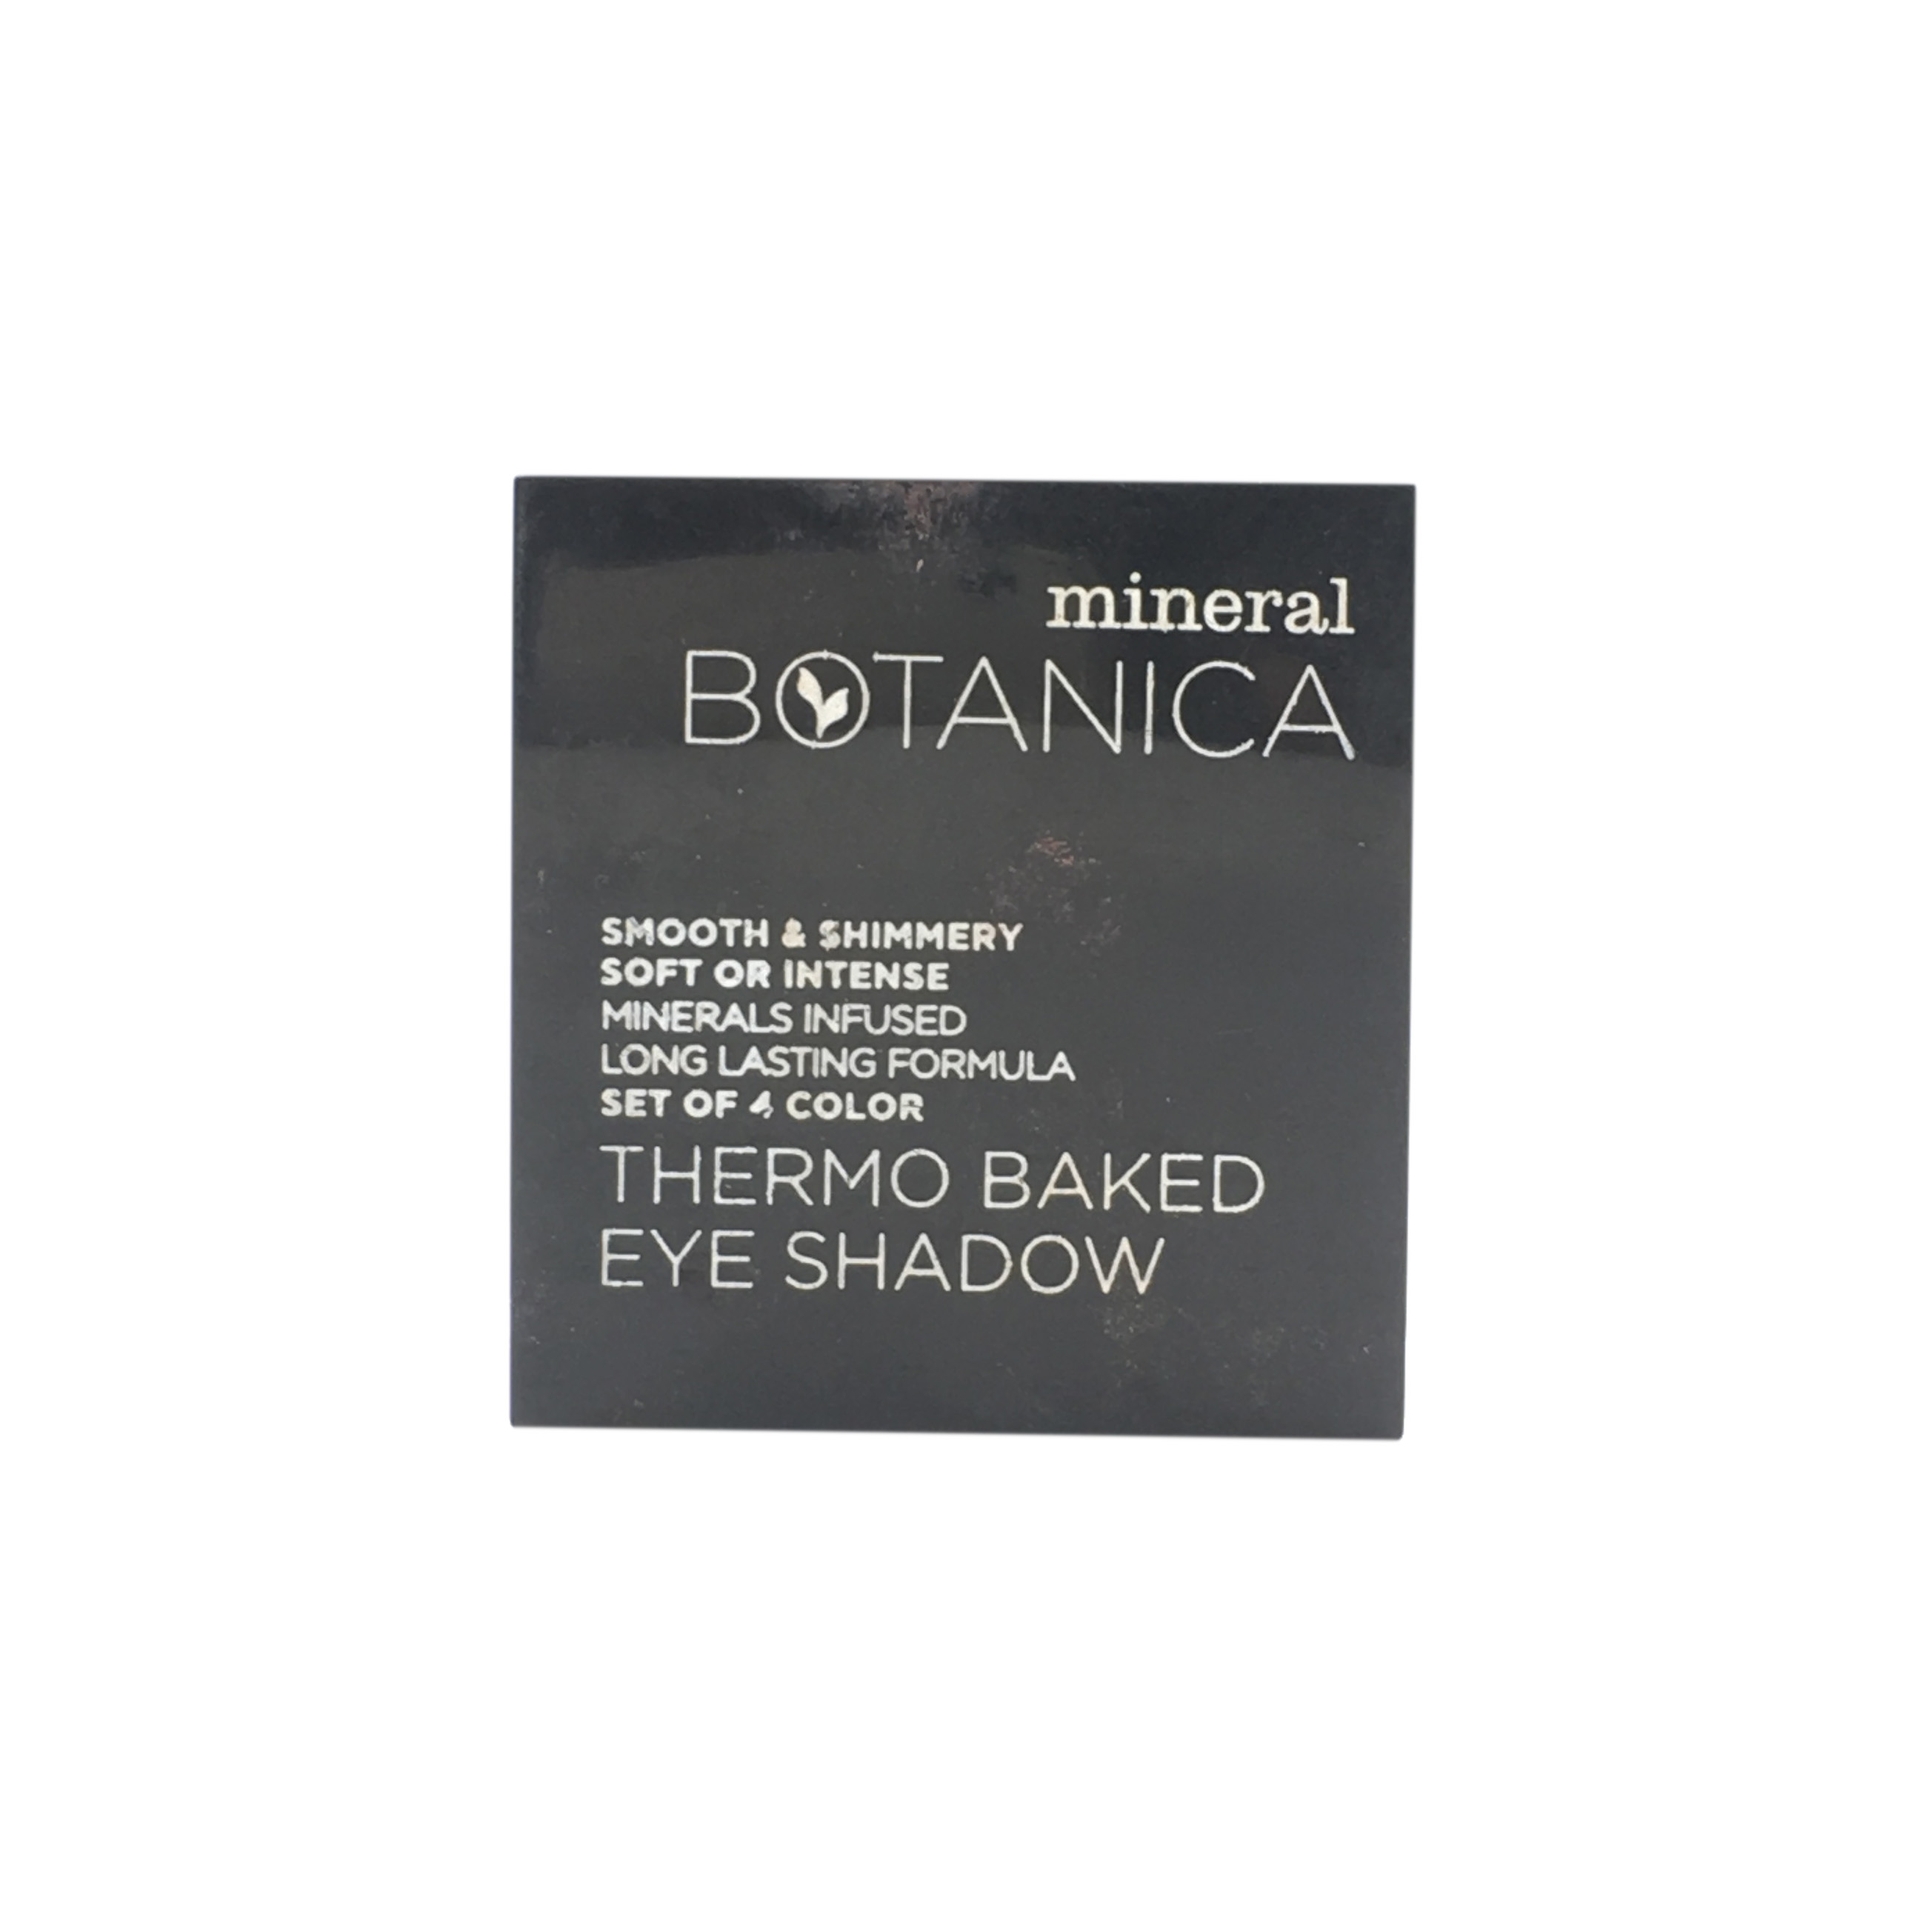 Mineral Botanica Smooth & Shimmery Soft Or Intense Long Lasting Formula Set Of 4 Color Thermo Baked Eye Shadow Eyes